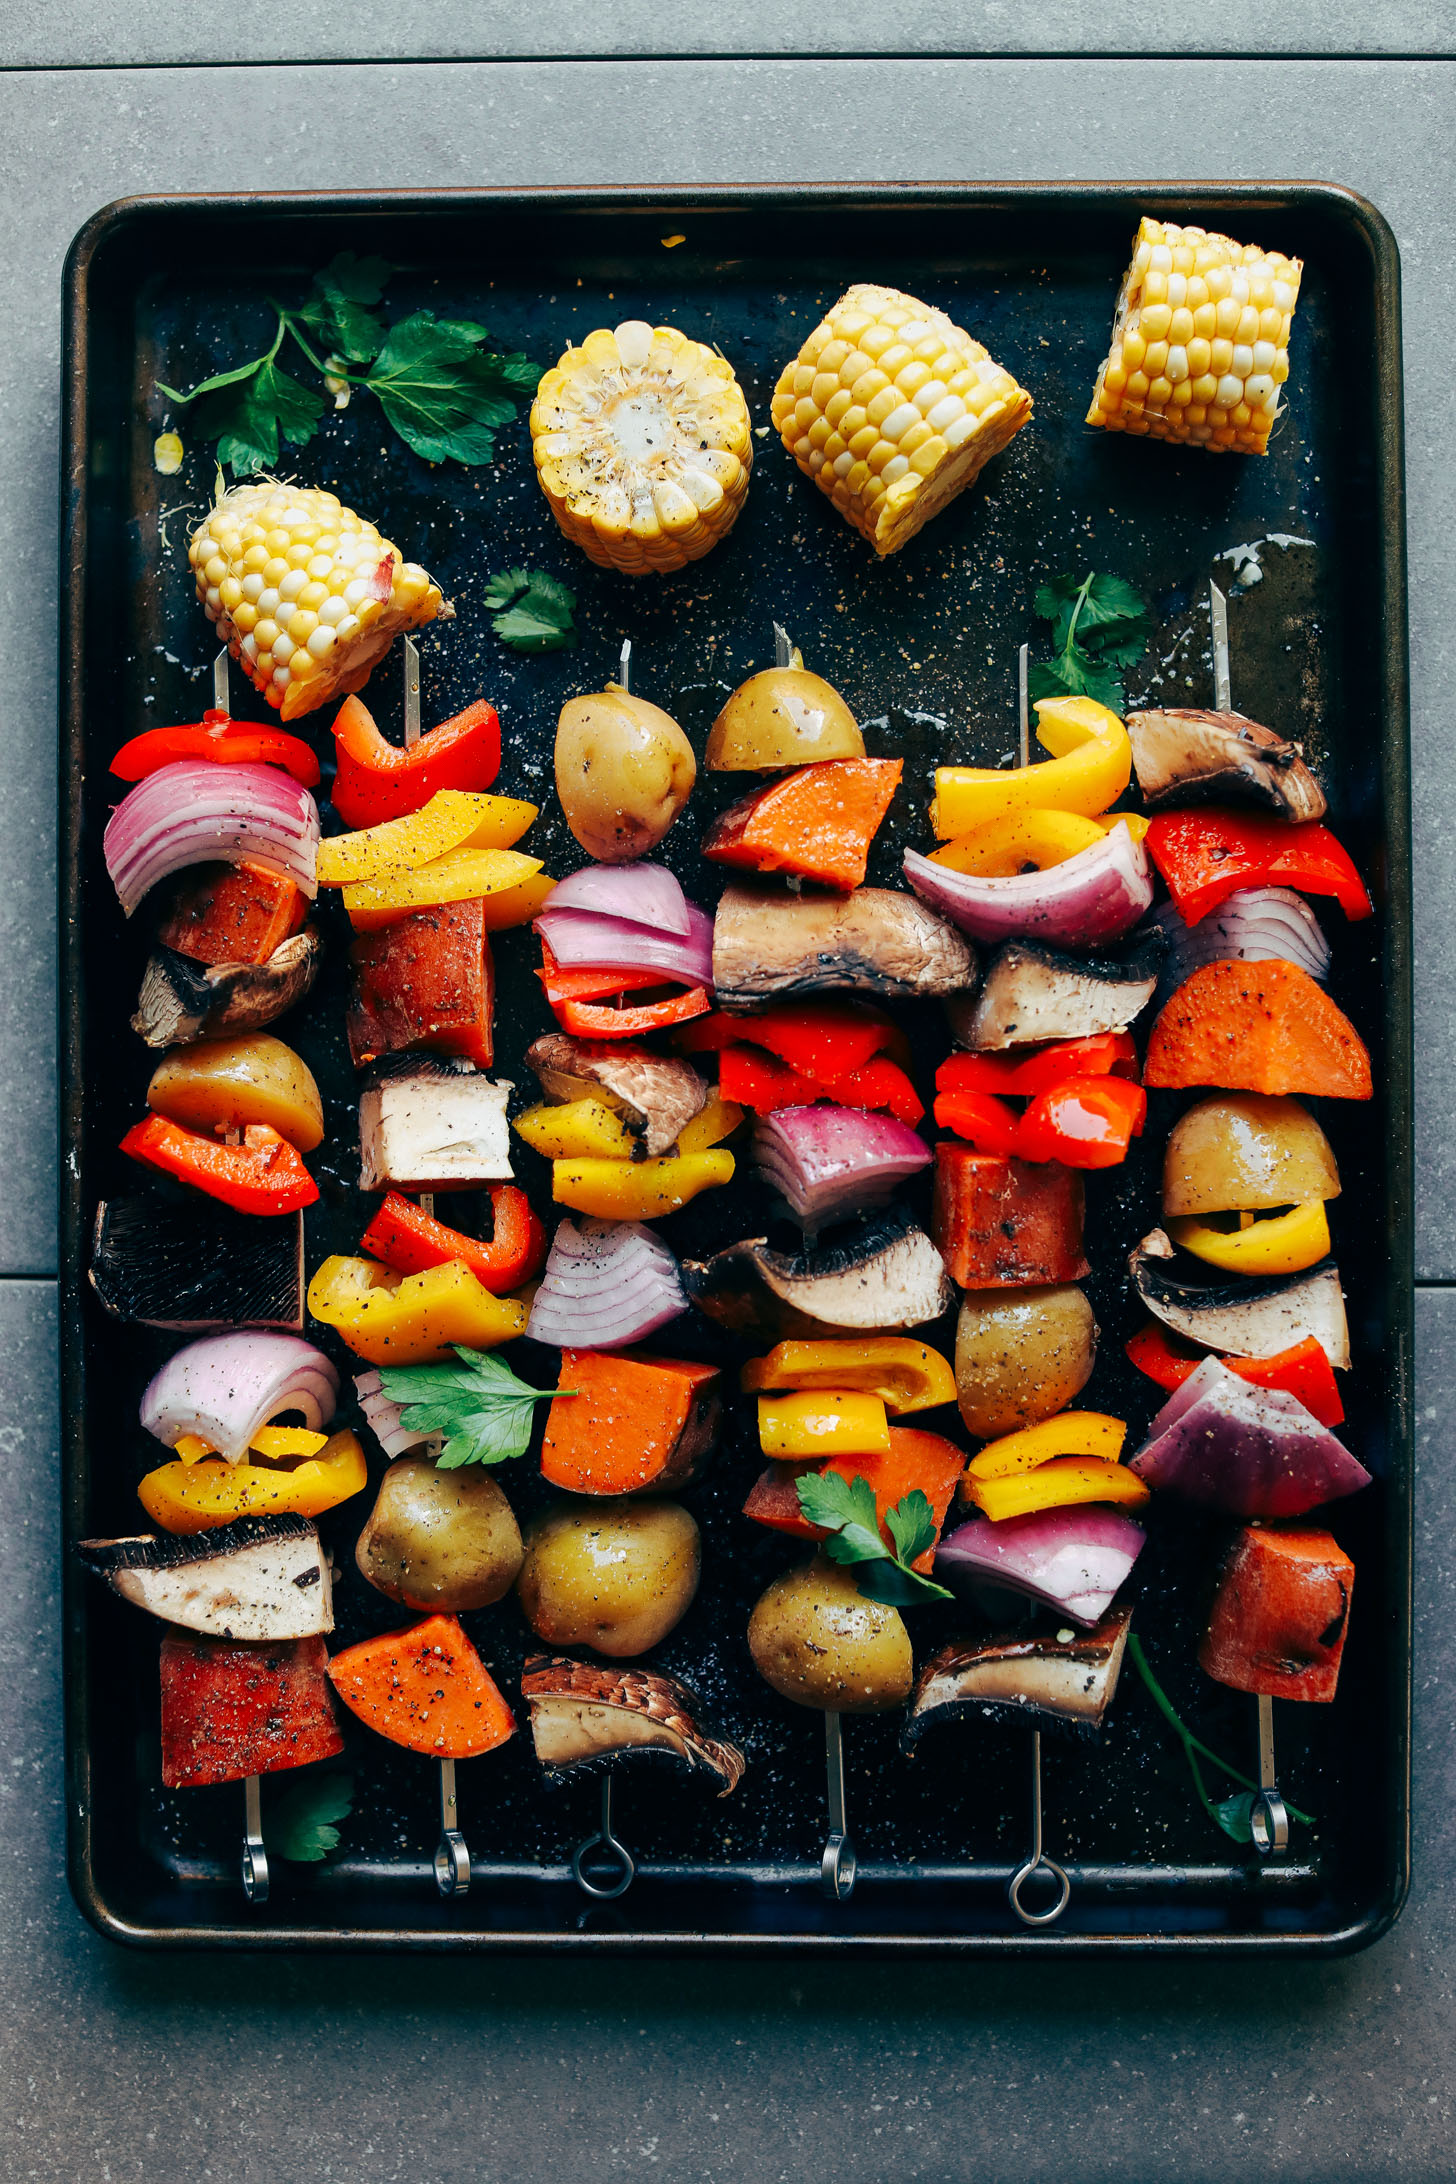 Vegan Grilled Skewers loaded with bell peppers, onion, potatoes, sweet potatoes, and mushrooms